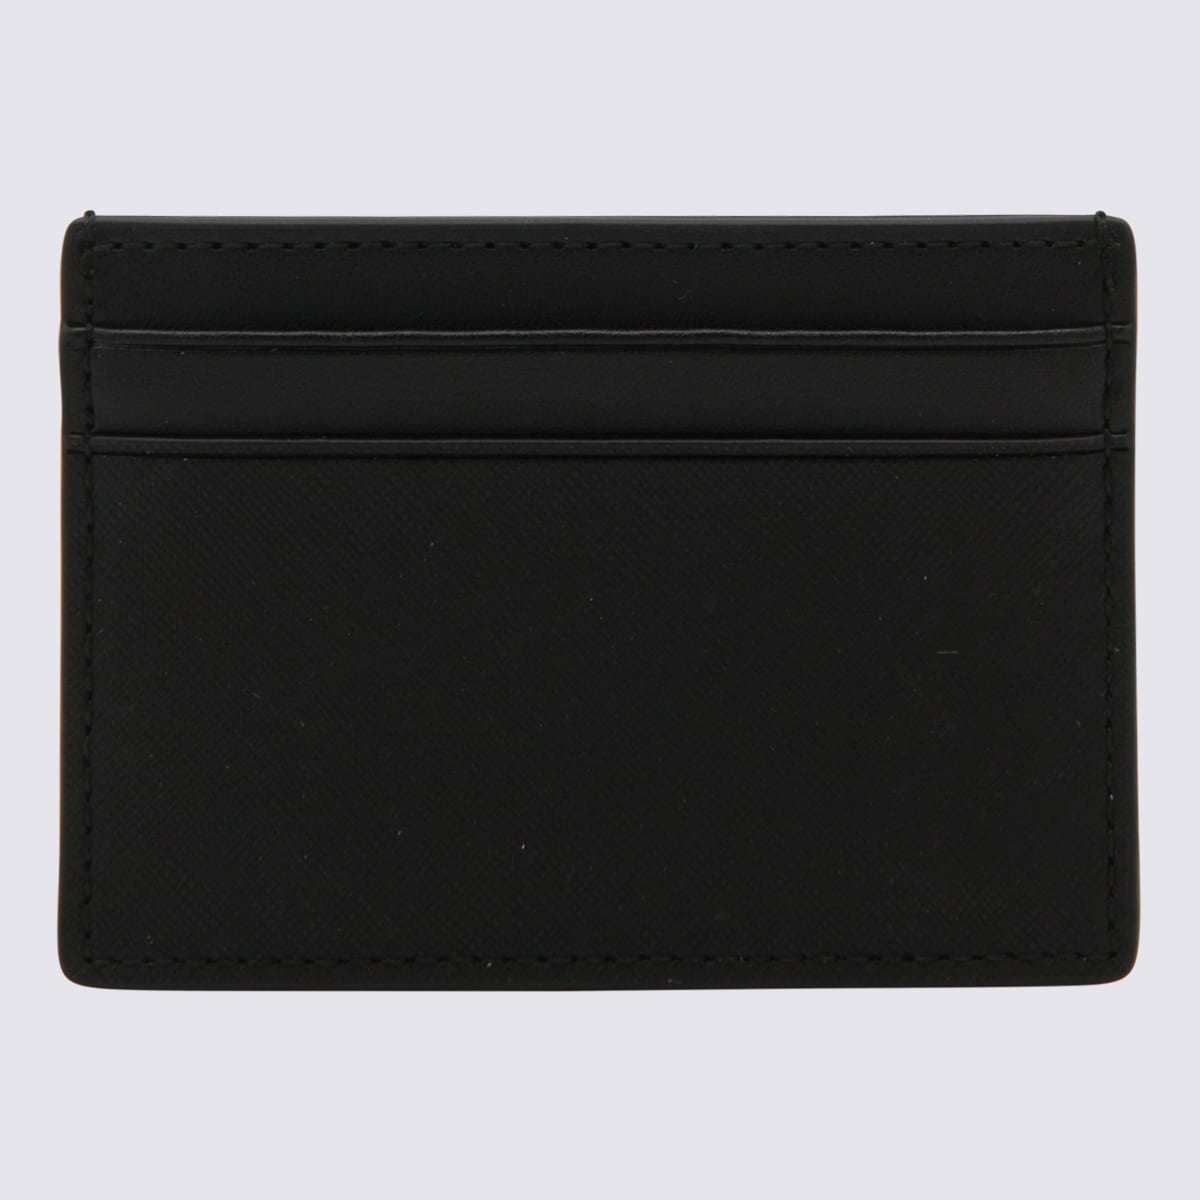 Shop Bally Balck And Red Leather Cardholder In Black